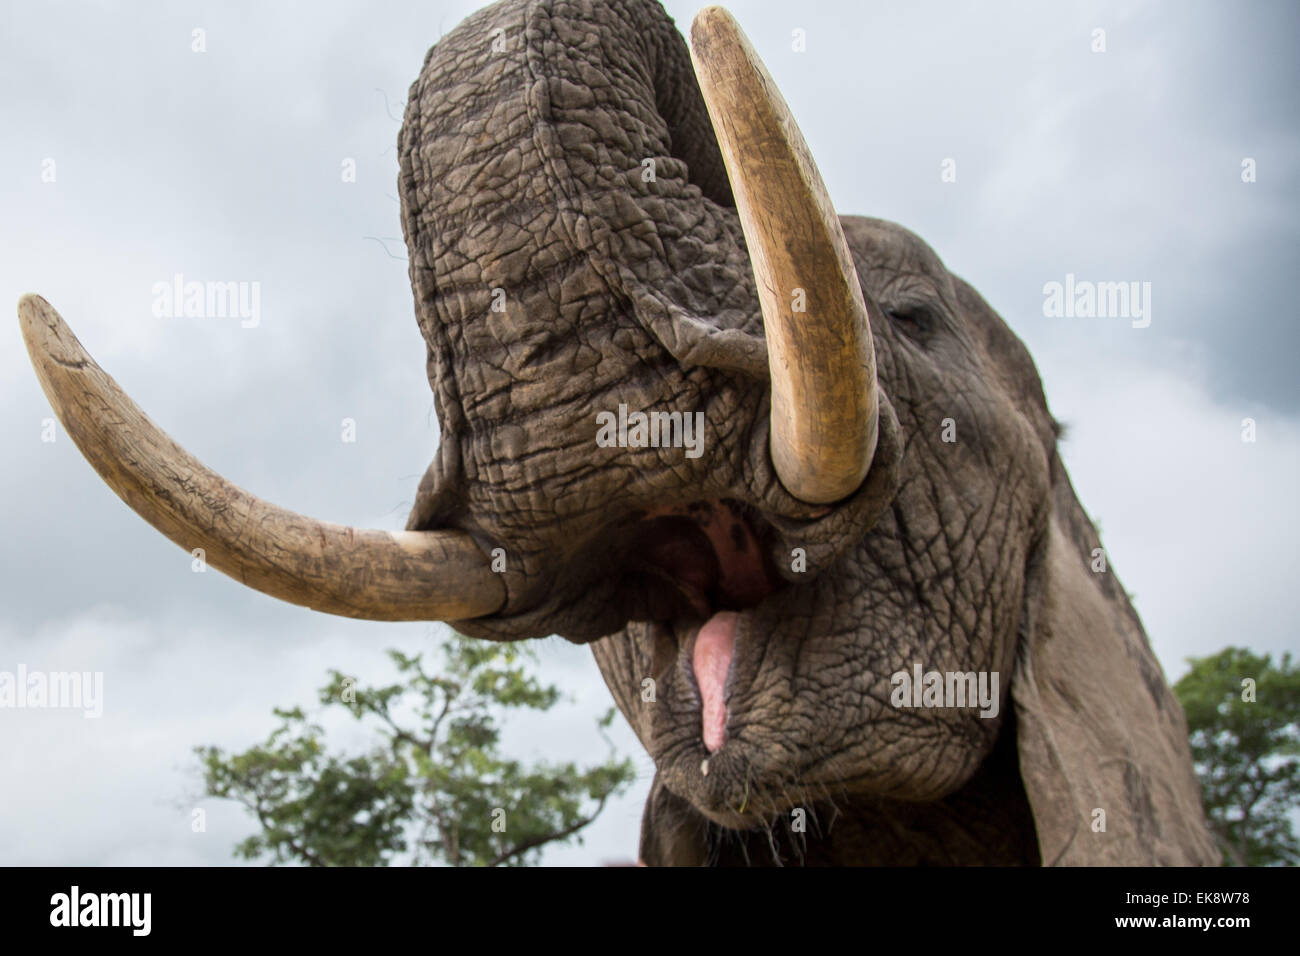 Harare, Zimbabwe. 7th Apr, 2015. Male elephant 'Boxer' opens its mouth to let tourists check its teeth during an elephant interaction program at a game park in Selous, 70 km from Harare, capital of Zimbabwe, on April 7, 2015. Home to around 80,000 to 100,000 elephants, Zimbabwe is considered one of the world's prime elephant sanctuaries. Animal rights groups propose developing eco-tourism which generate tourism revenue and help reserve the wildlife at their comfort zone at the same time. © Xu Lingui/Xinhua/Alamy Live News Stock Photo